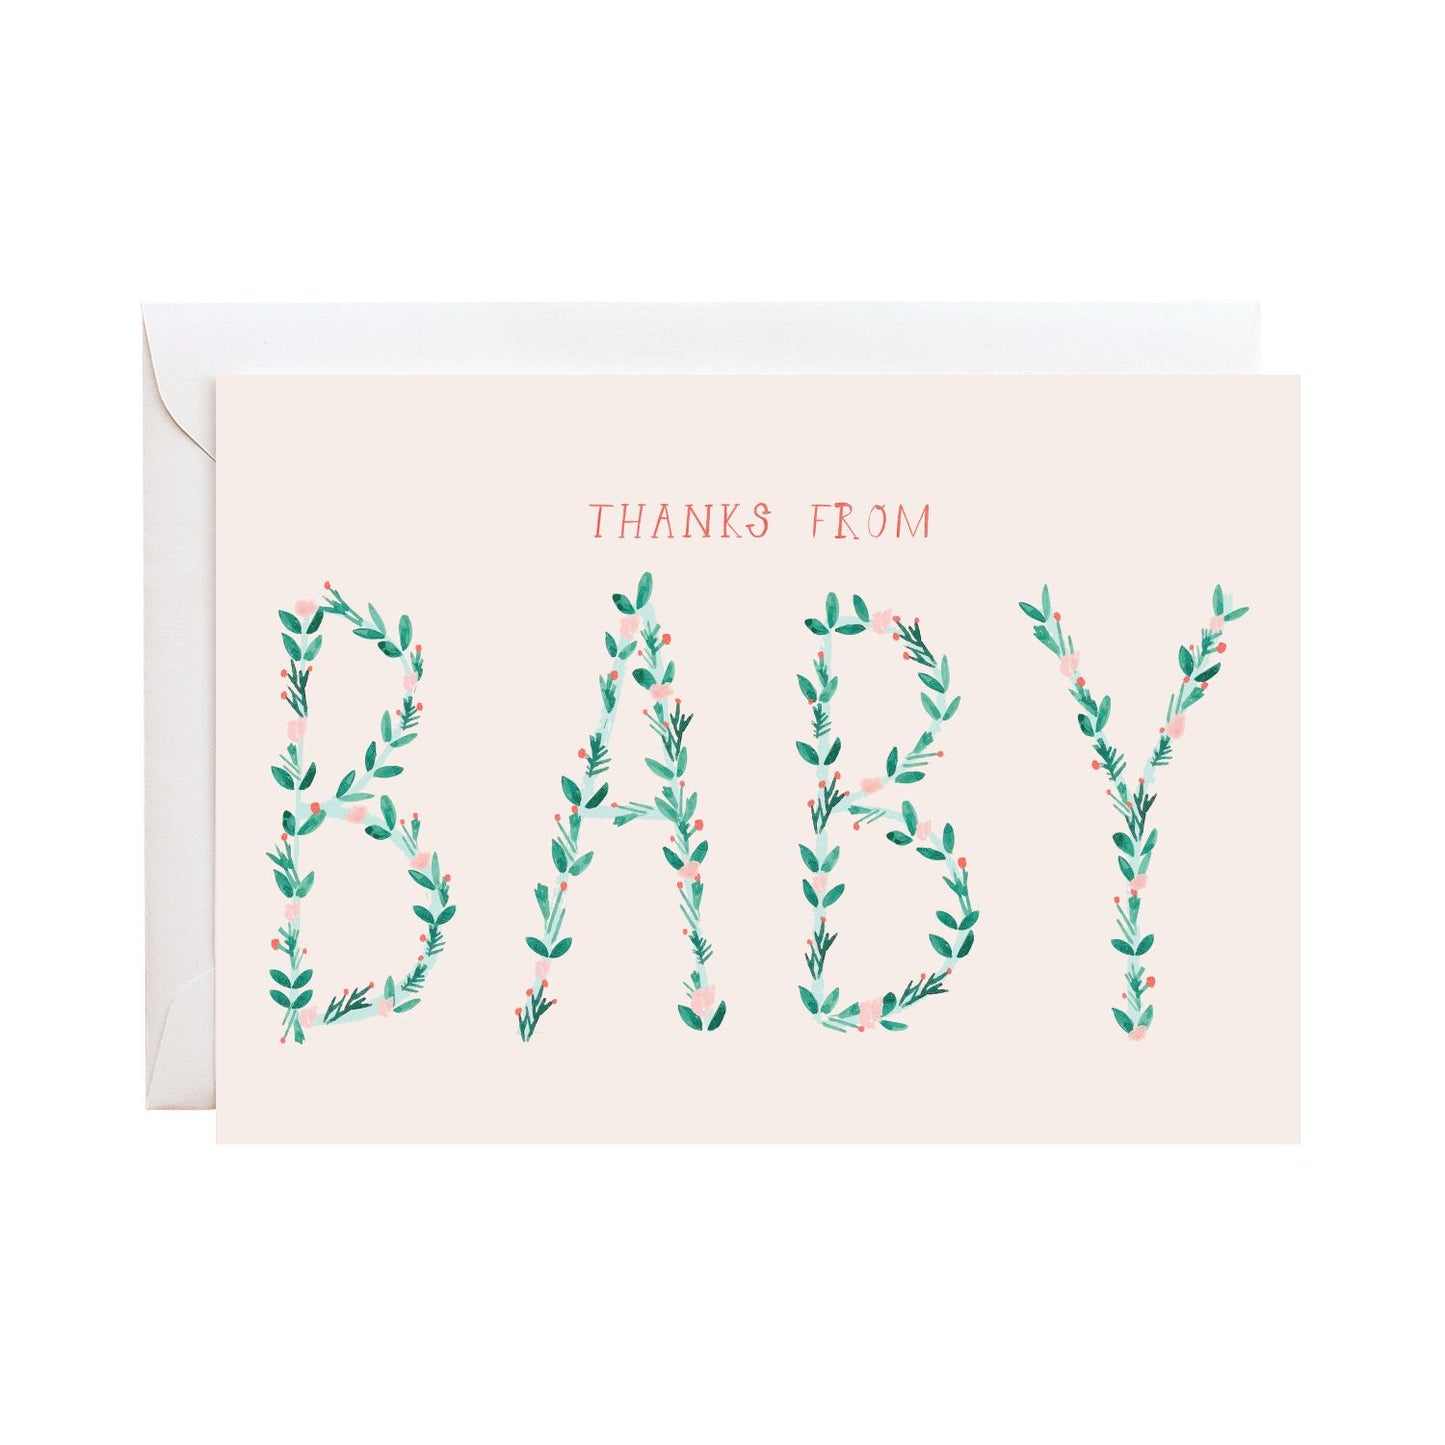 Thanks from Baby Boxed Notecards